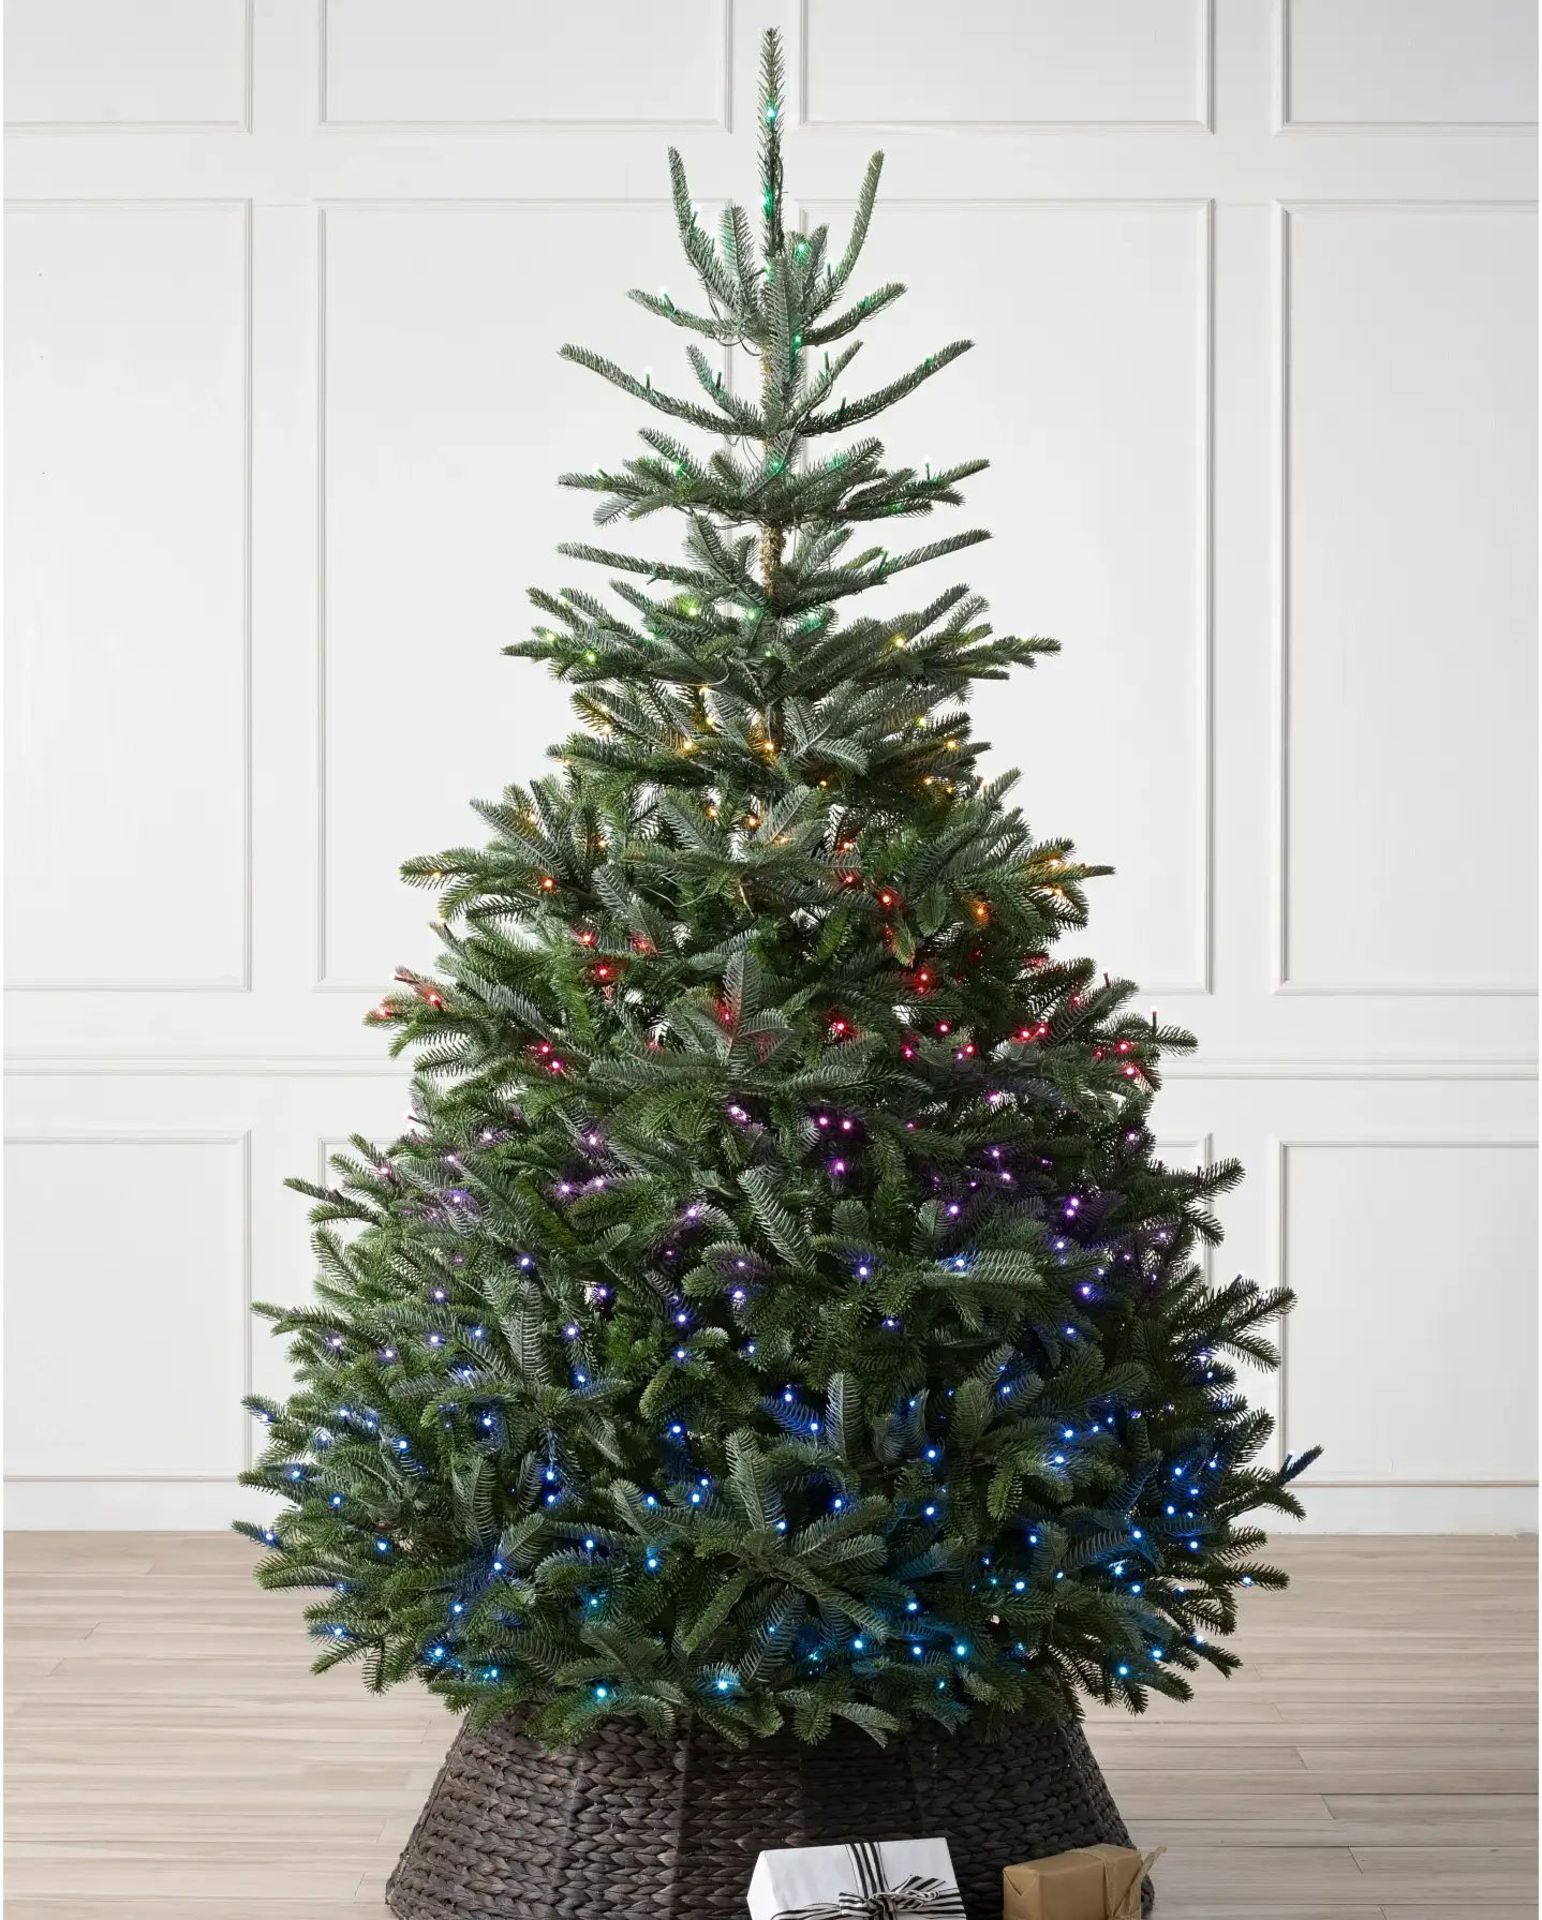 Balsam Hill (The worlds leading Christmas Trees) BH Nordmann Fir® 6ft with LED Twinkly Lights.